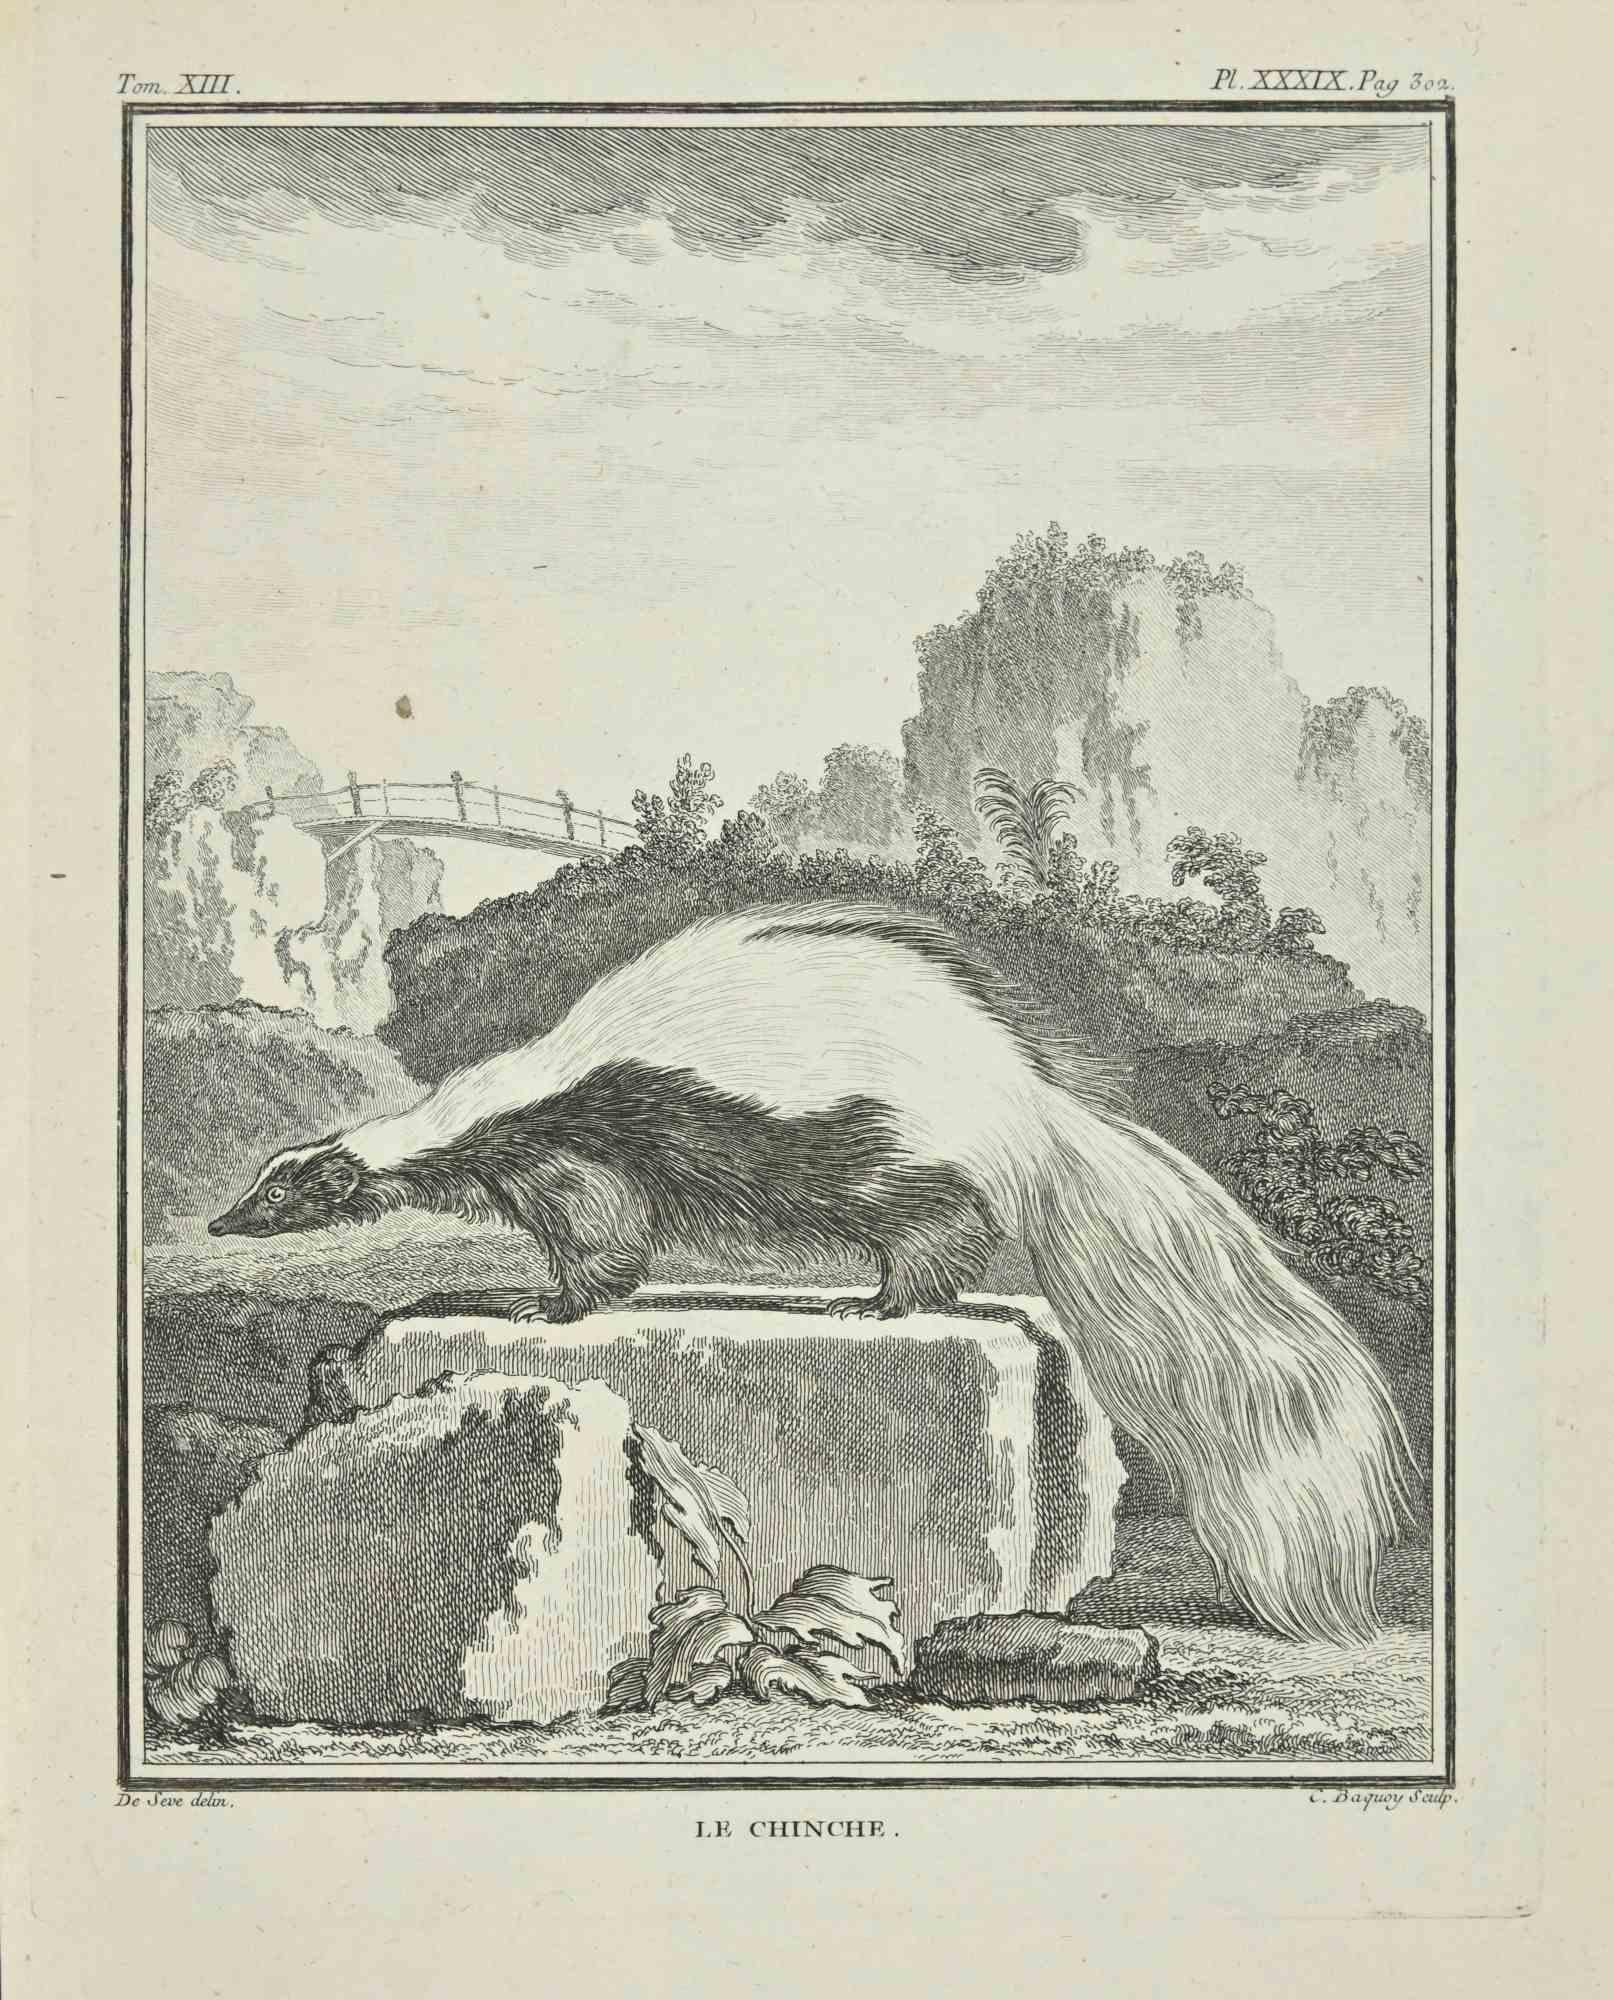 Le Chincher is an etching realized by Jean Charles Baquoy in 1771.

It belongs to the suite "Histoire Naturelle de Buffon".

The Artist's signature is engraved lower right.

Good conditions.